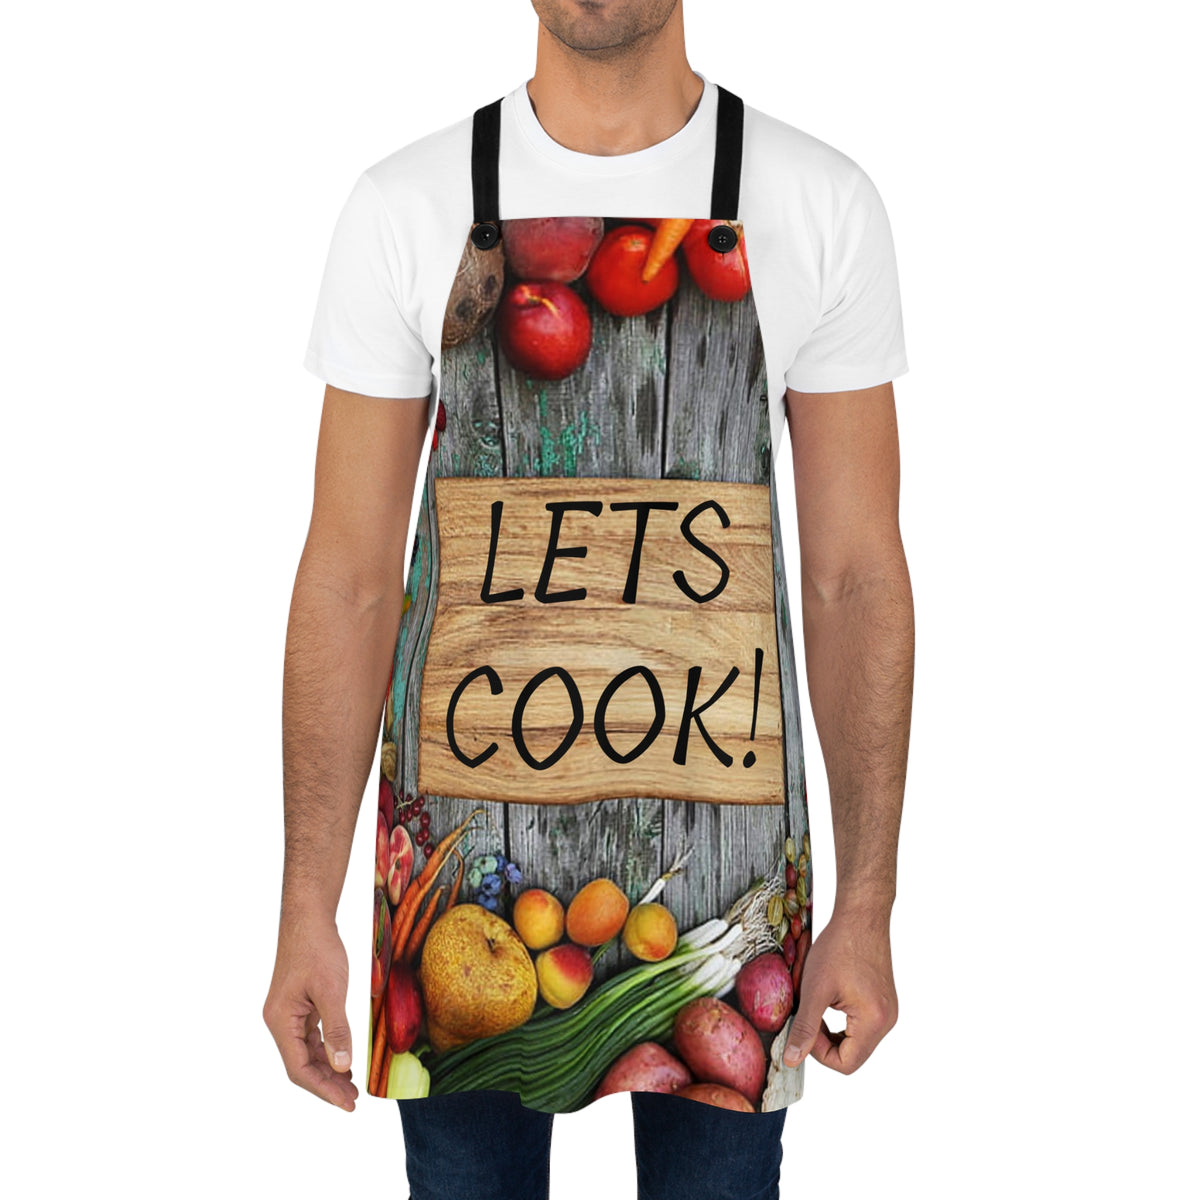 Lets Cook Apron for Cooking